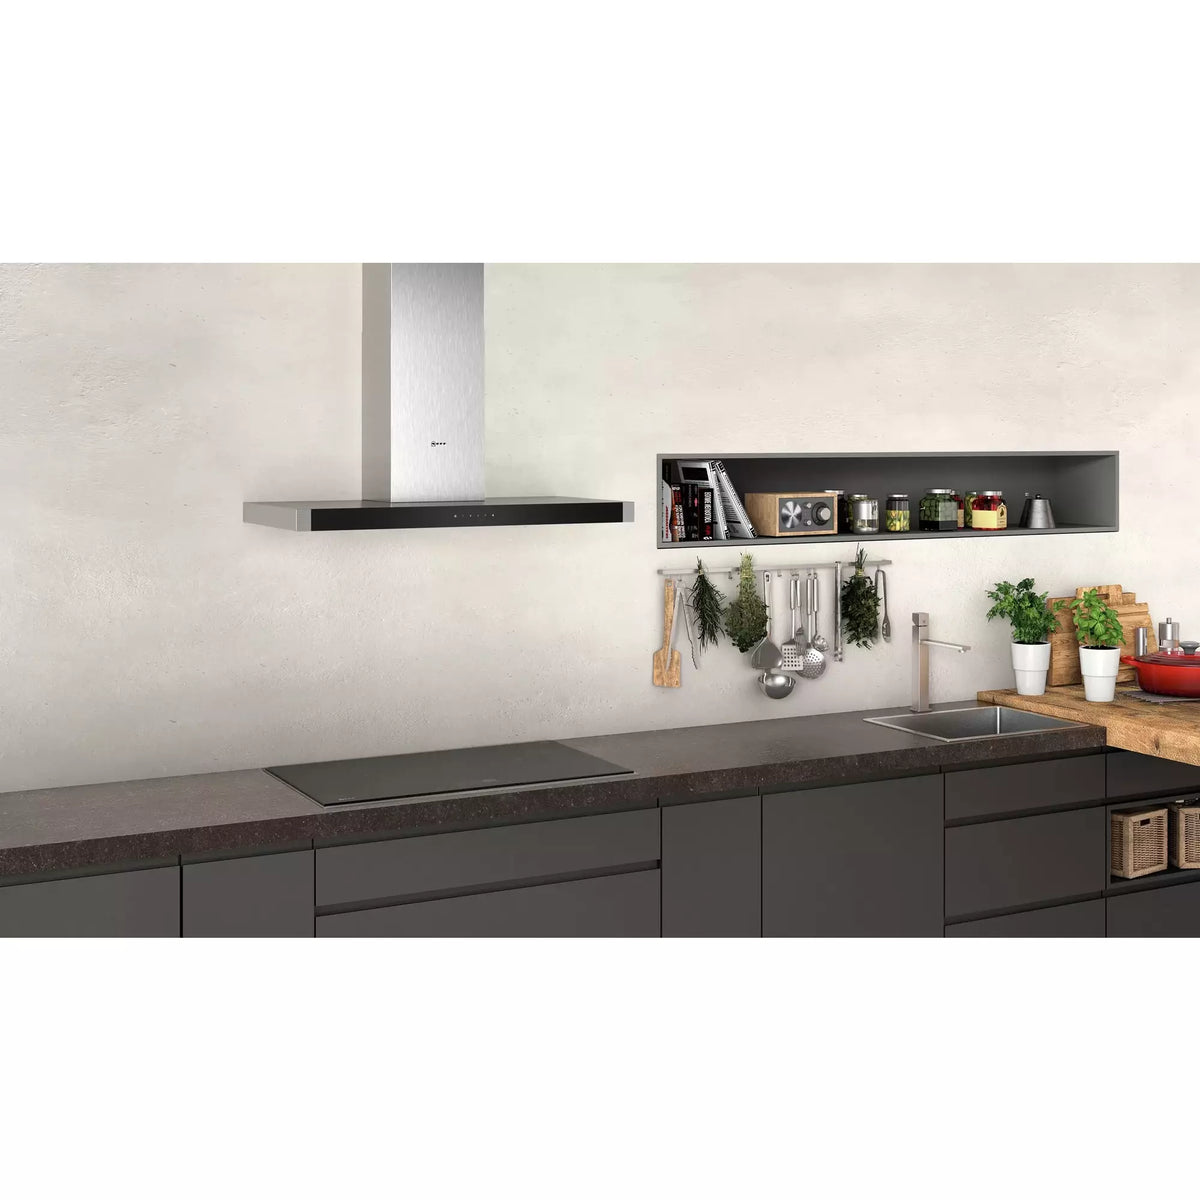 Neff N50 90cm Wall-Mounted Cooker Hood - Stainless Steel | D94BHM1N0B from Neff - DID Electrical